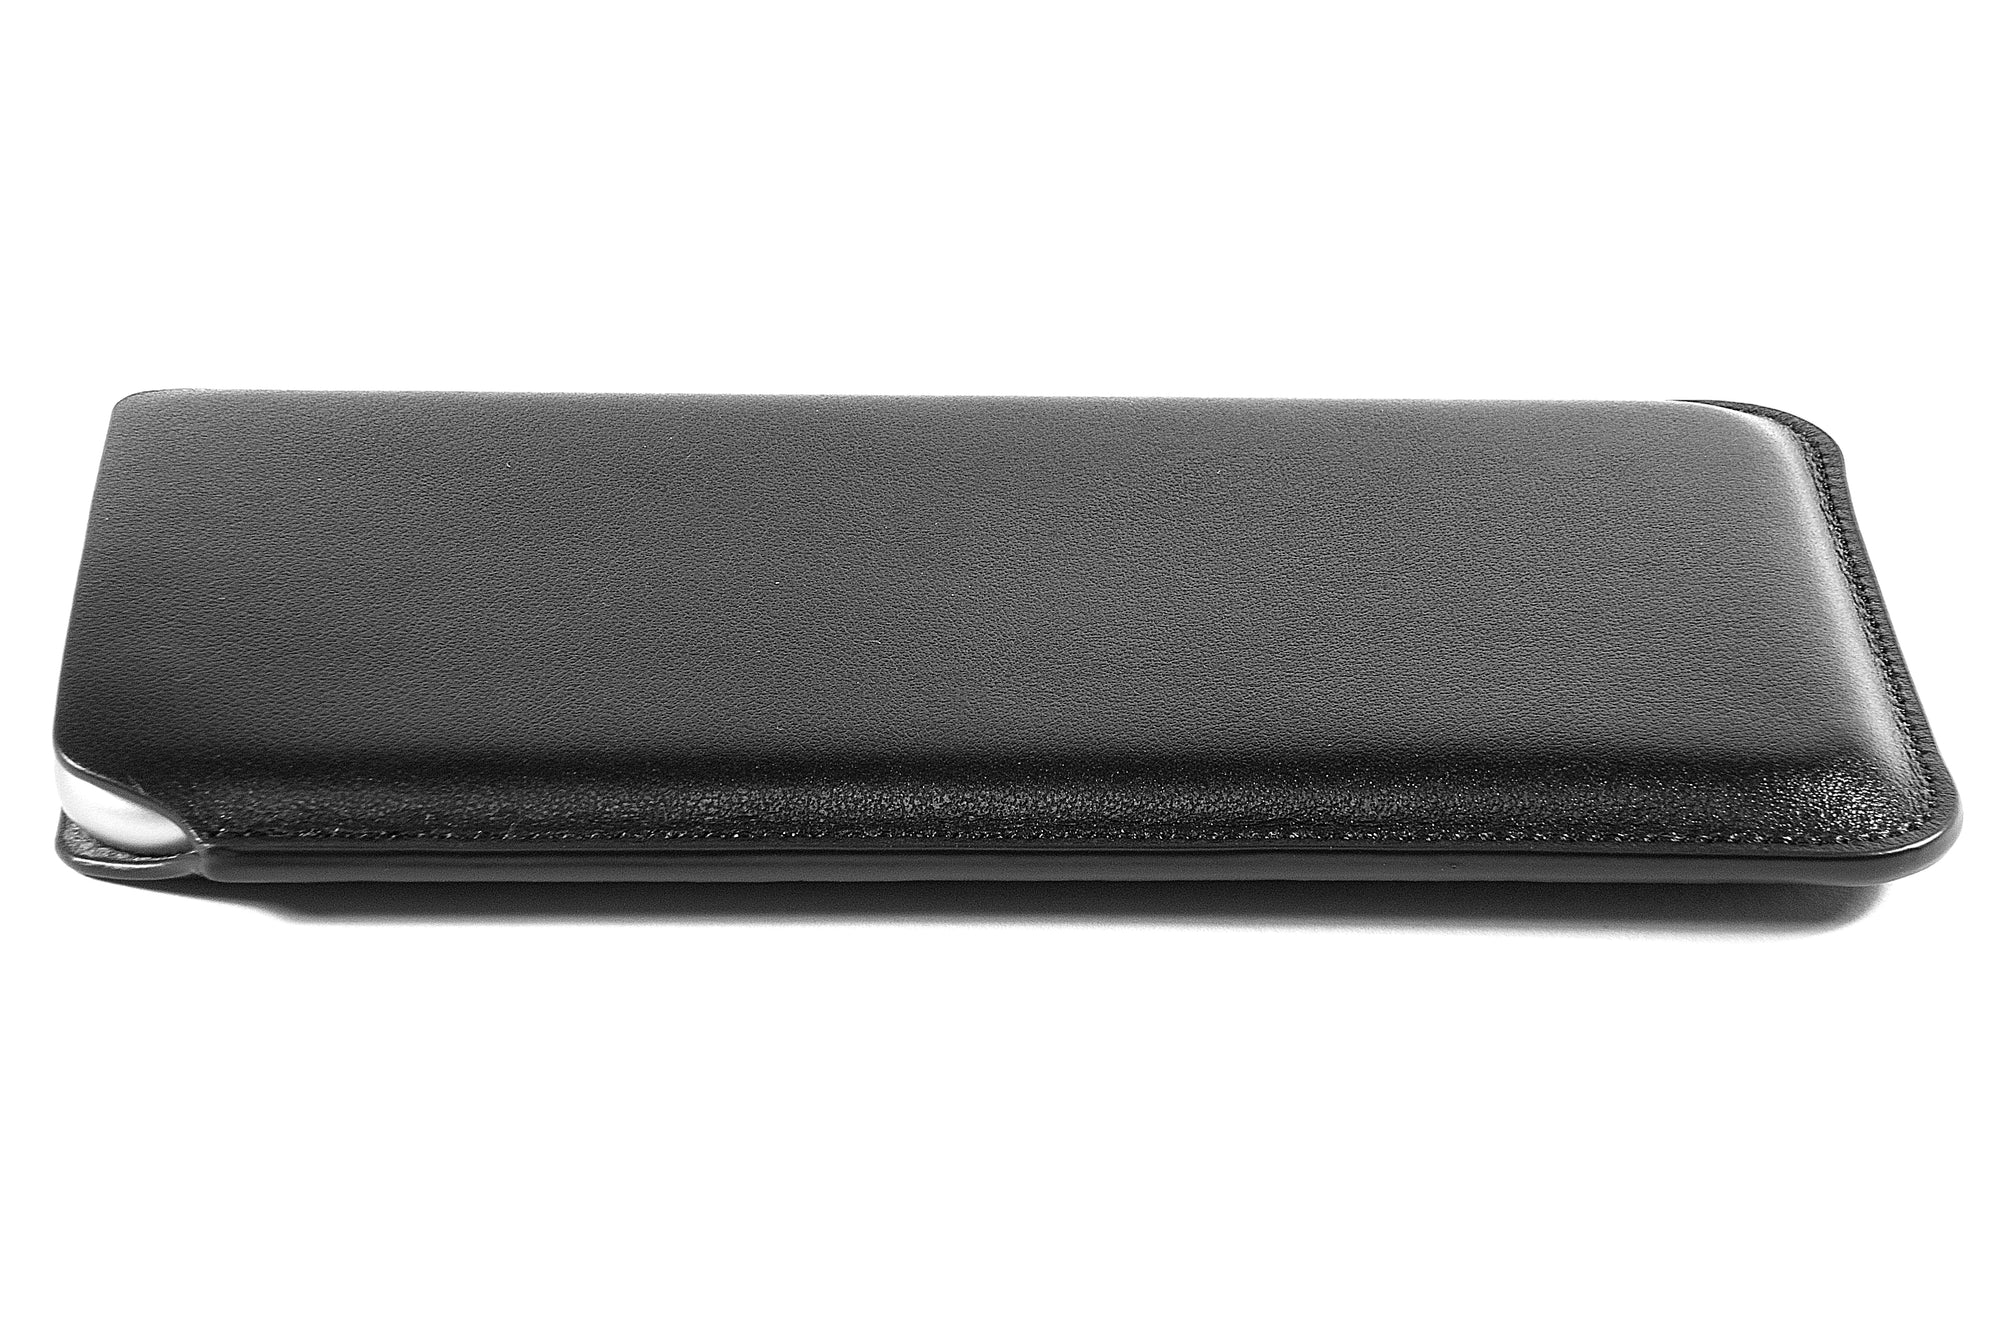 iPhone XR Leather Case Pouch - Skinny Fit - Black